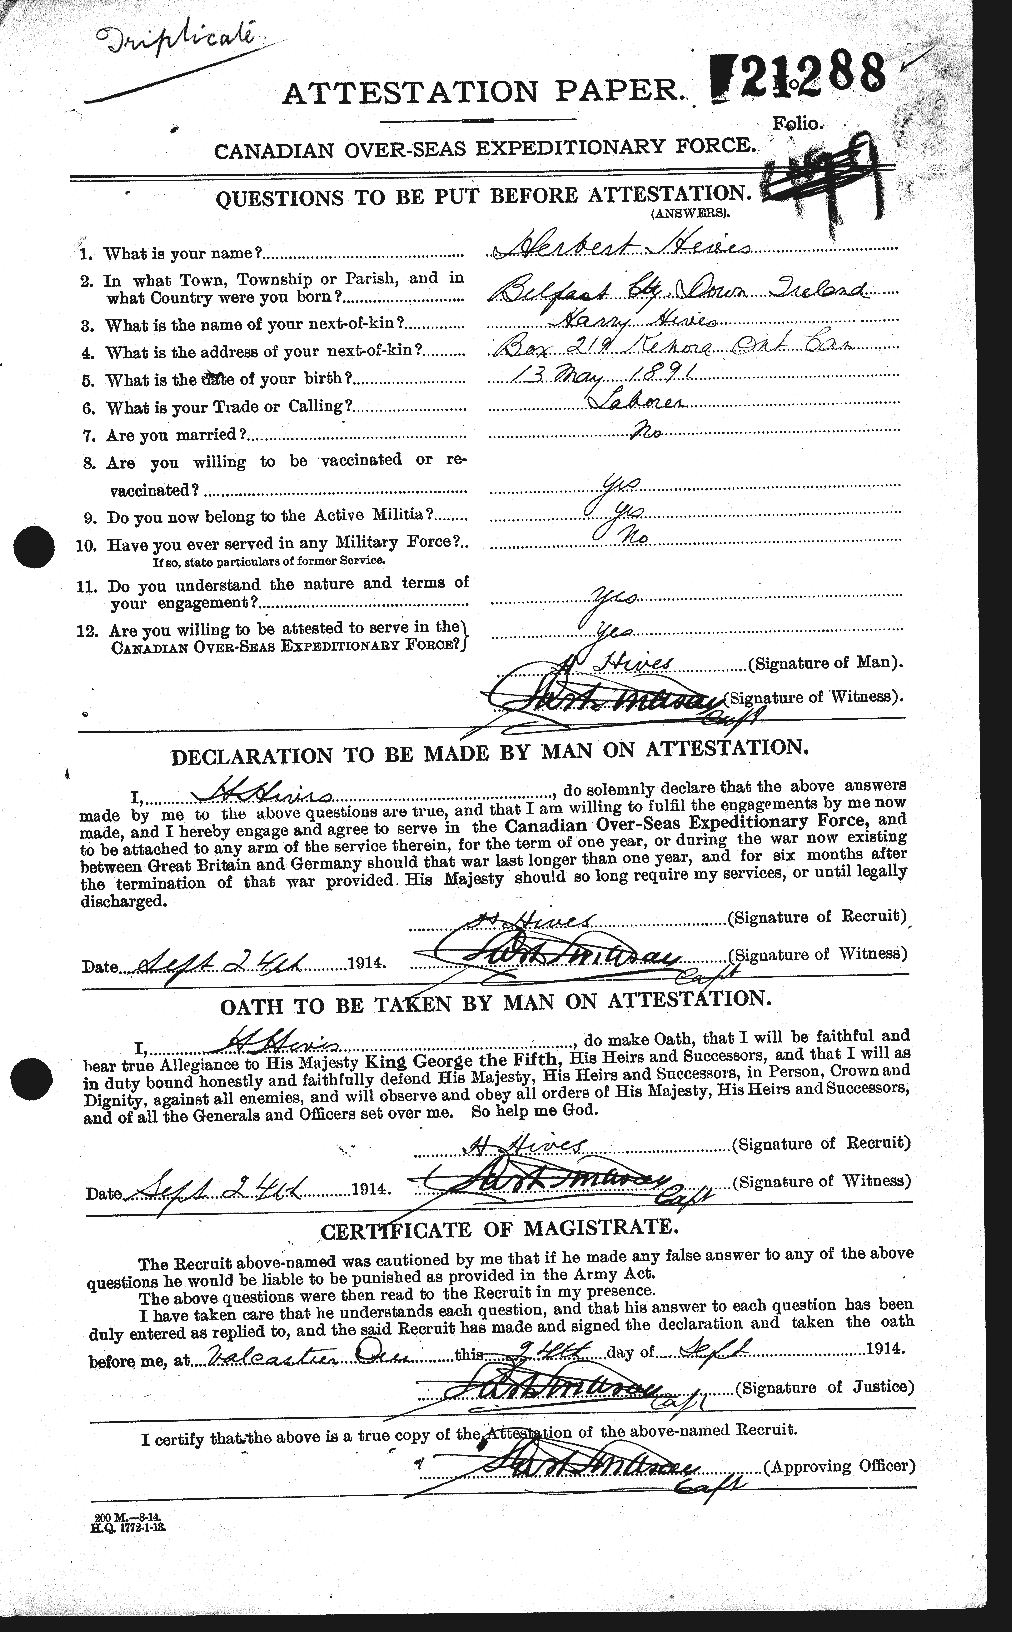 Personnel Records of the First World War - CEF 394676a